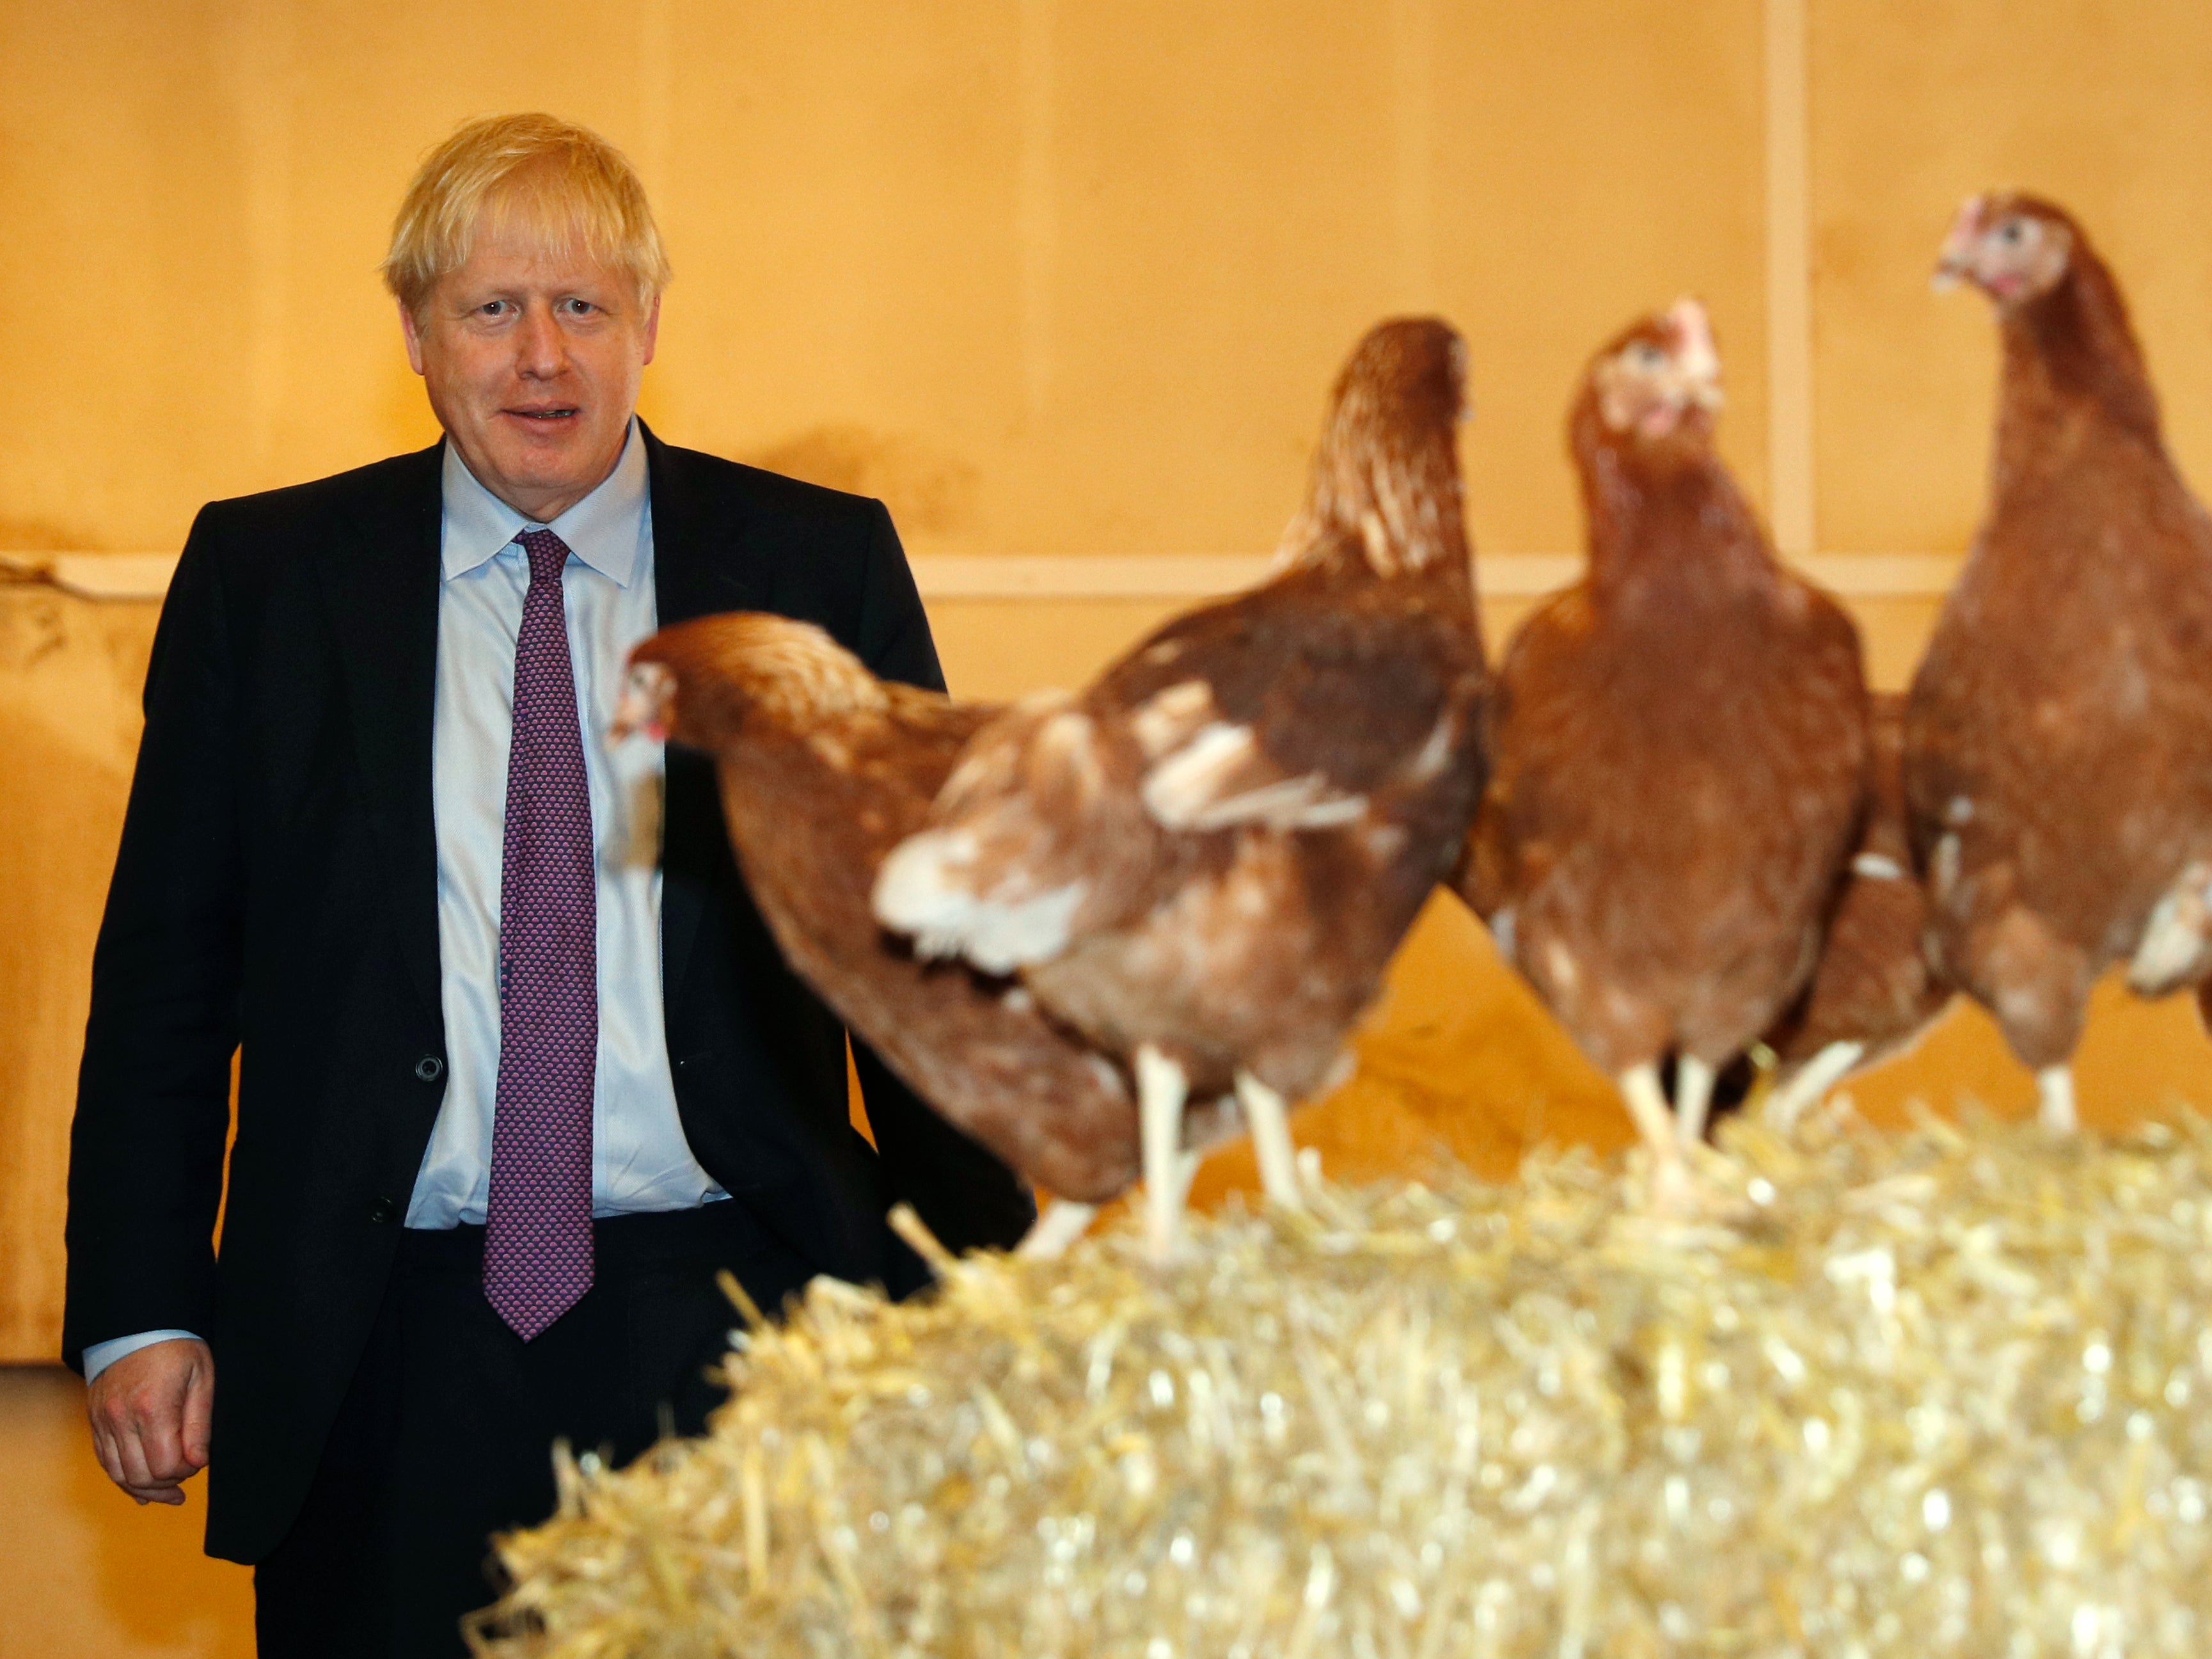 Boris Johnson inspects chickens on a visit to farm in Newport, south Wales